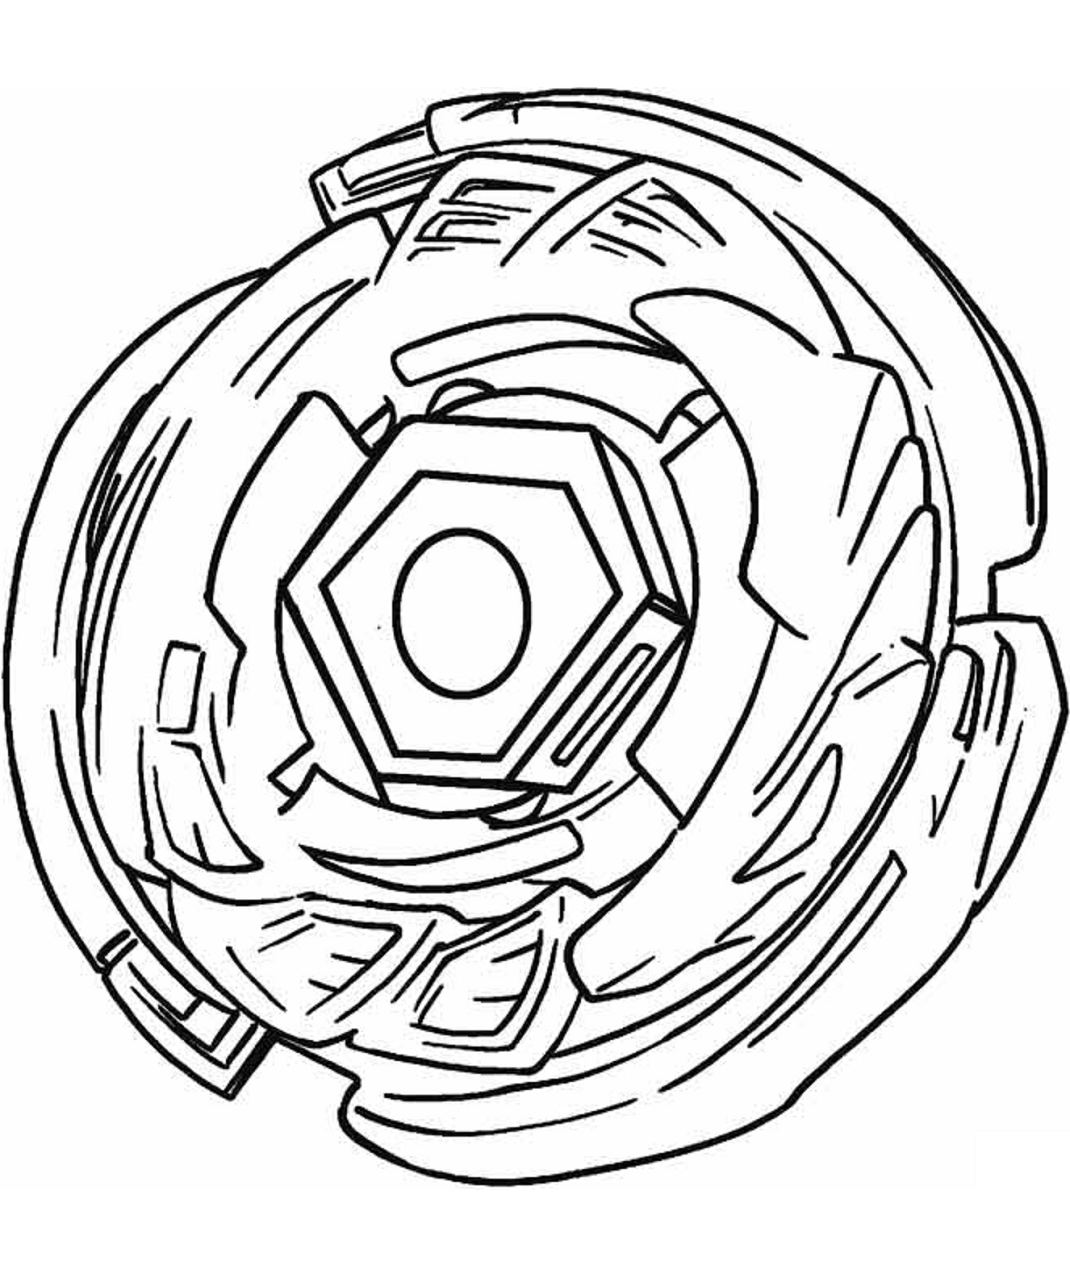 Beyblade Burst Coloring Pages.